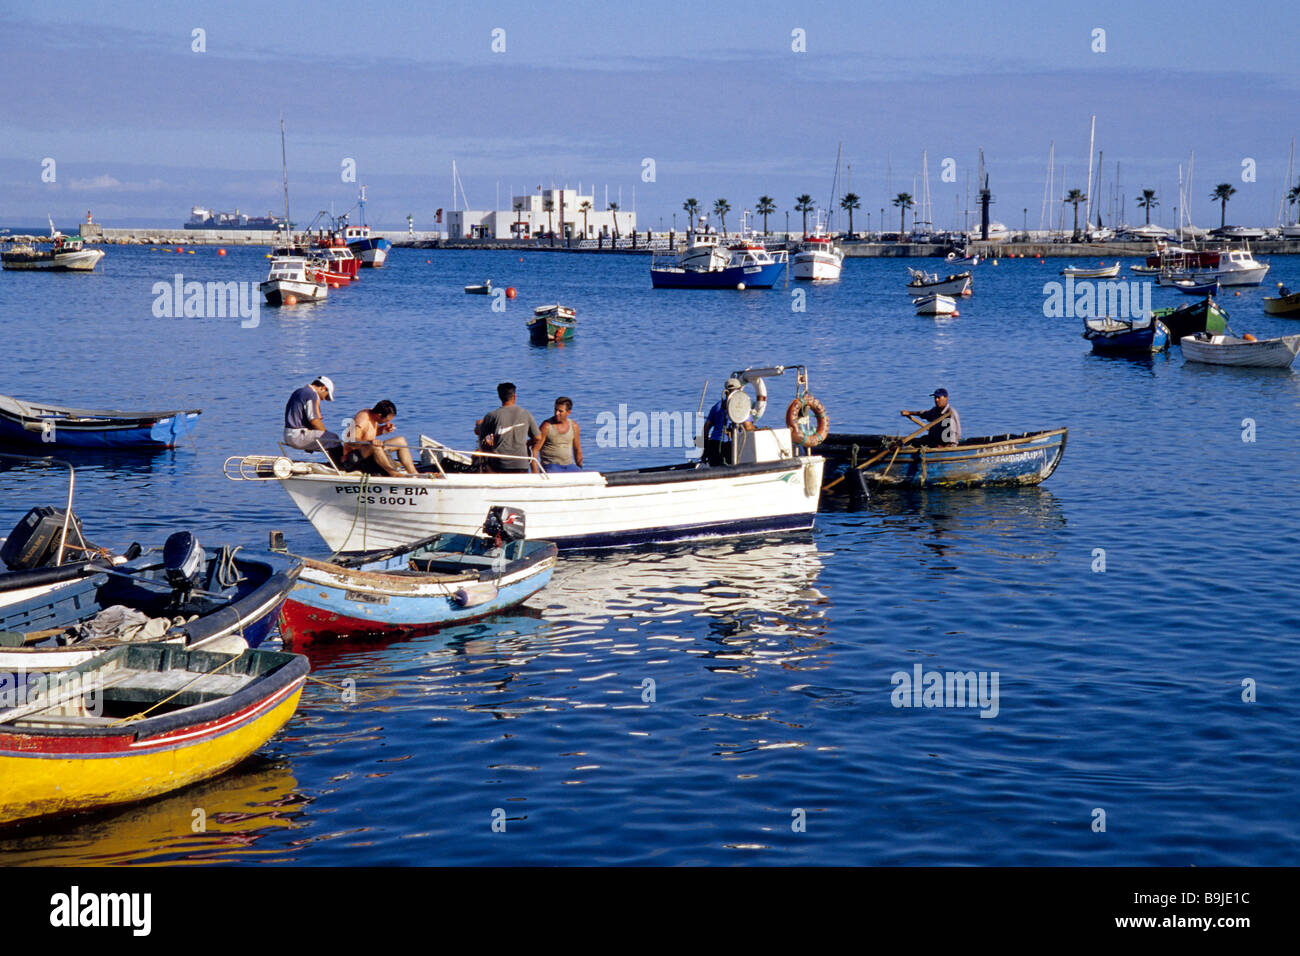 Porto de Pesca, boats at the harbour of Cascais, a fishing village, grown together with Estoril, Lisbon, Portugal, Europe Stock Photo